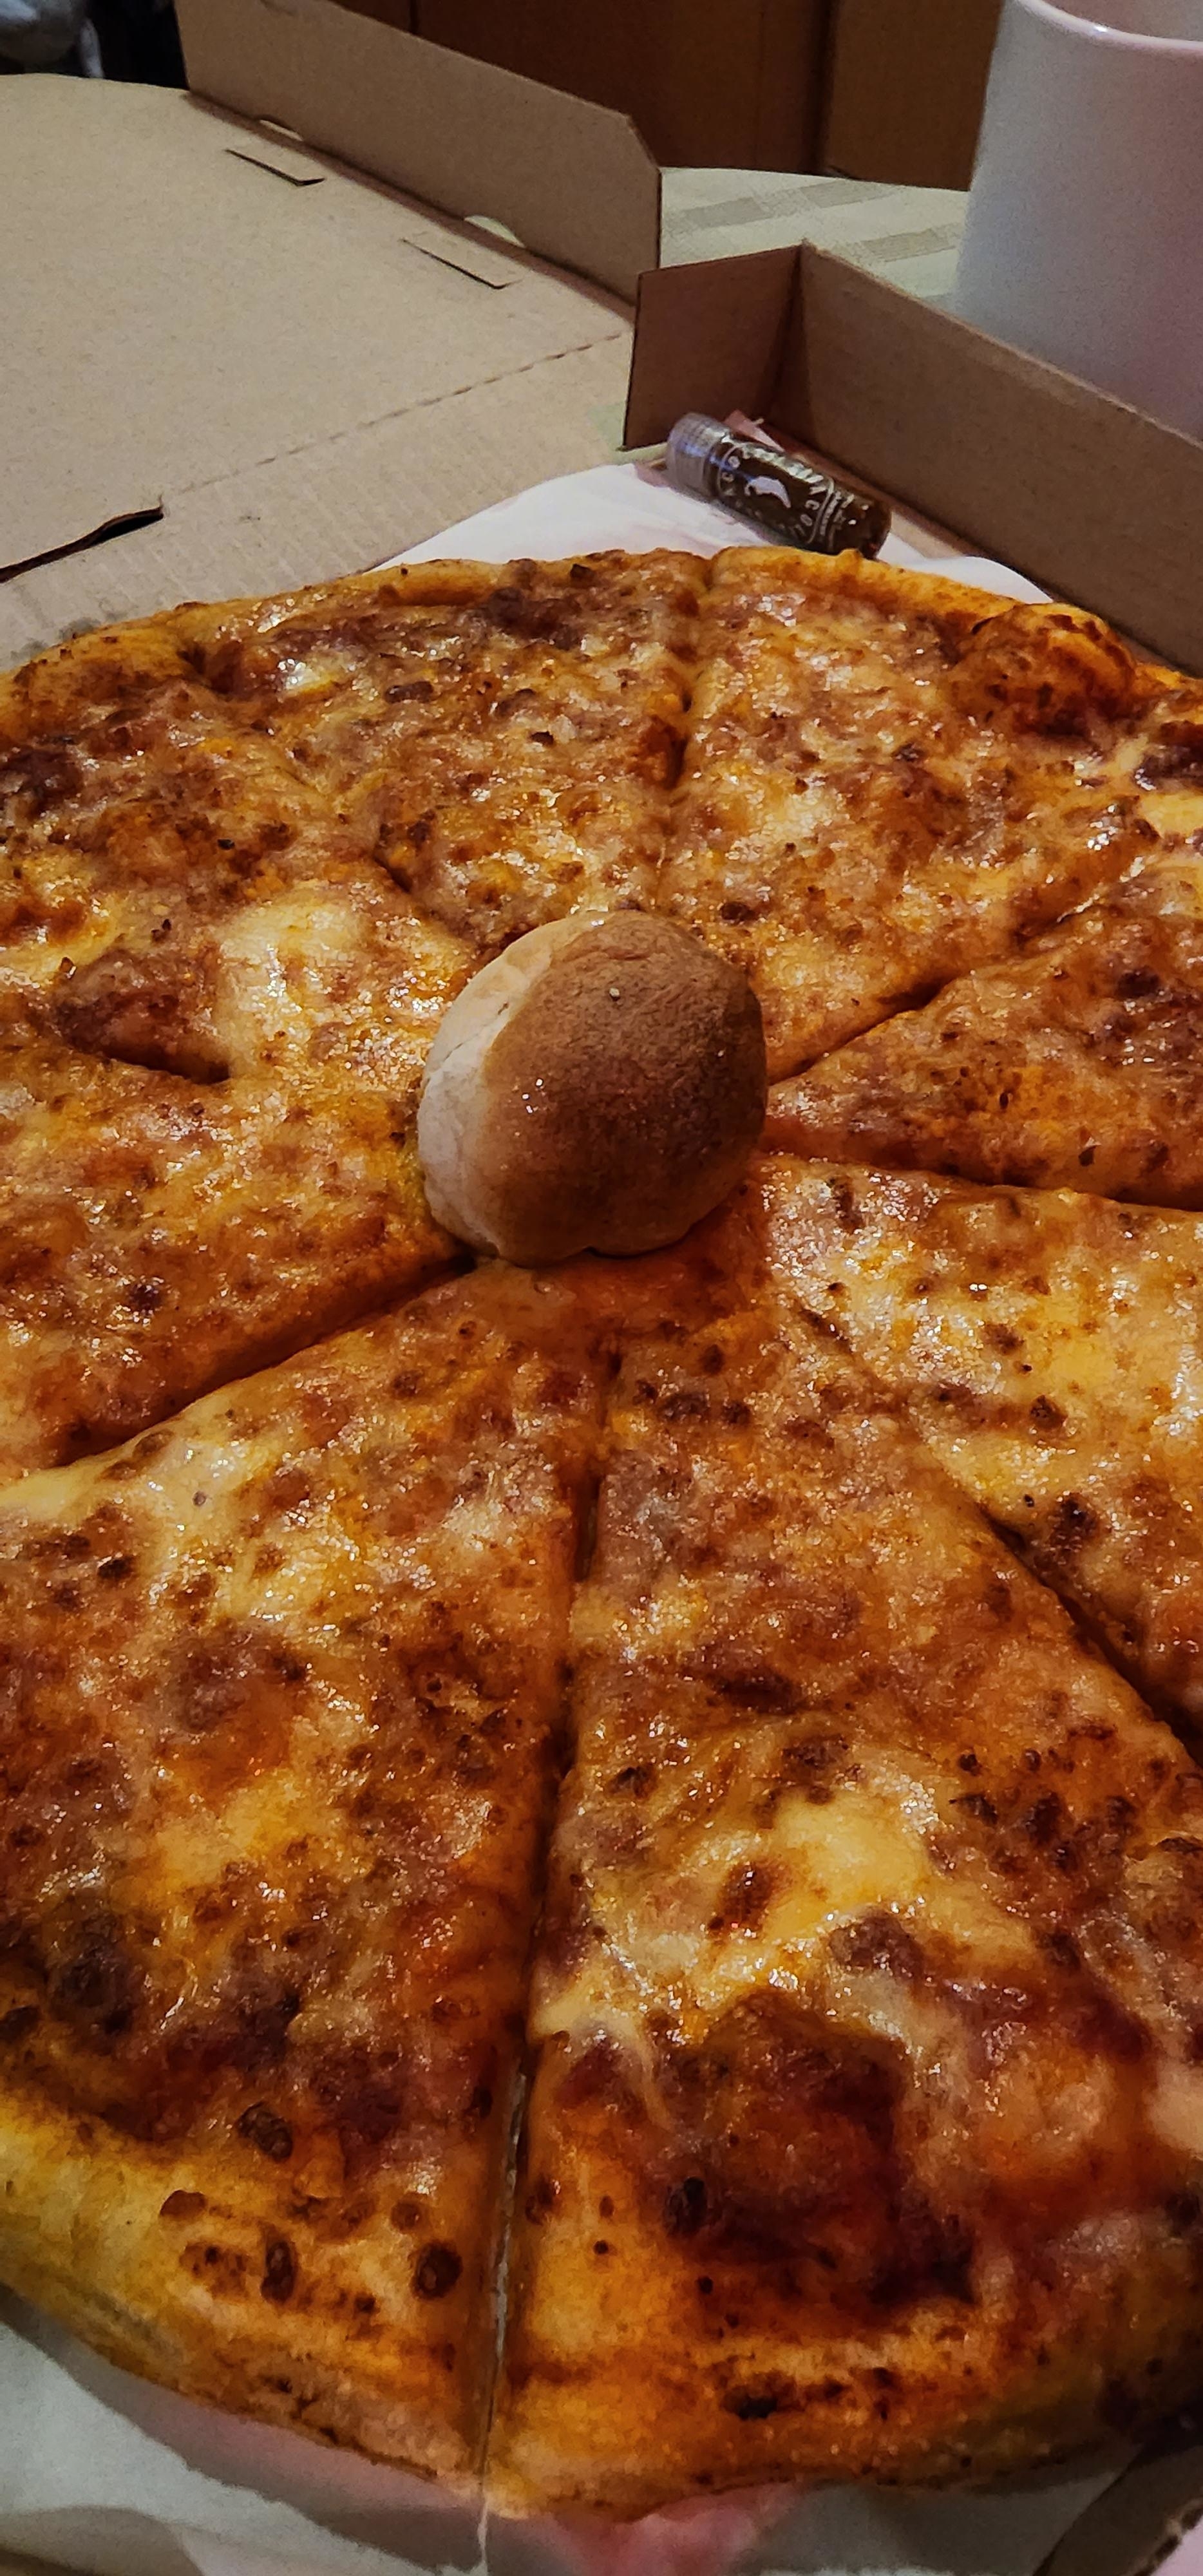 cooked dough ball in the center of a pizza